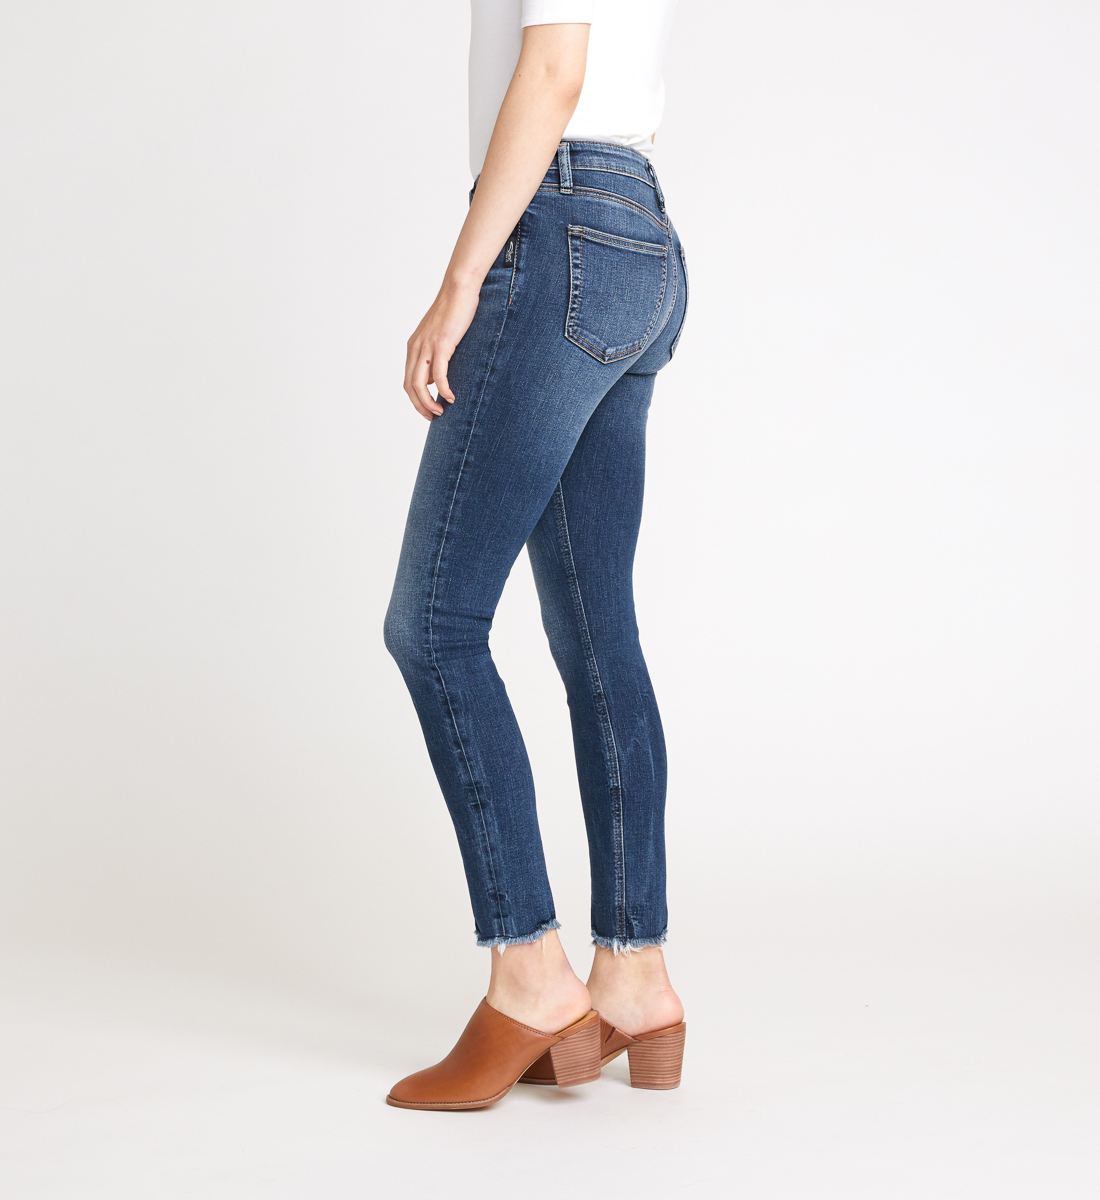 Most Wanted Mid Rise Skinny Jeans - Silver Jeans US